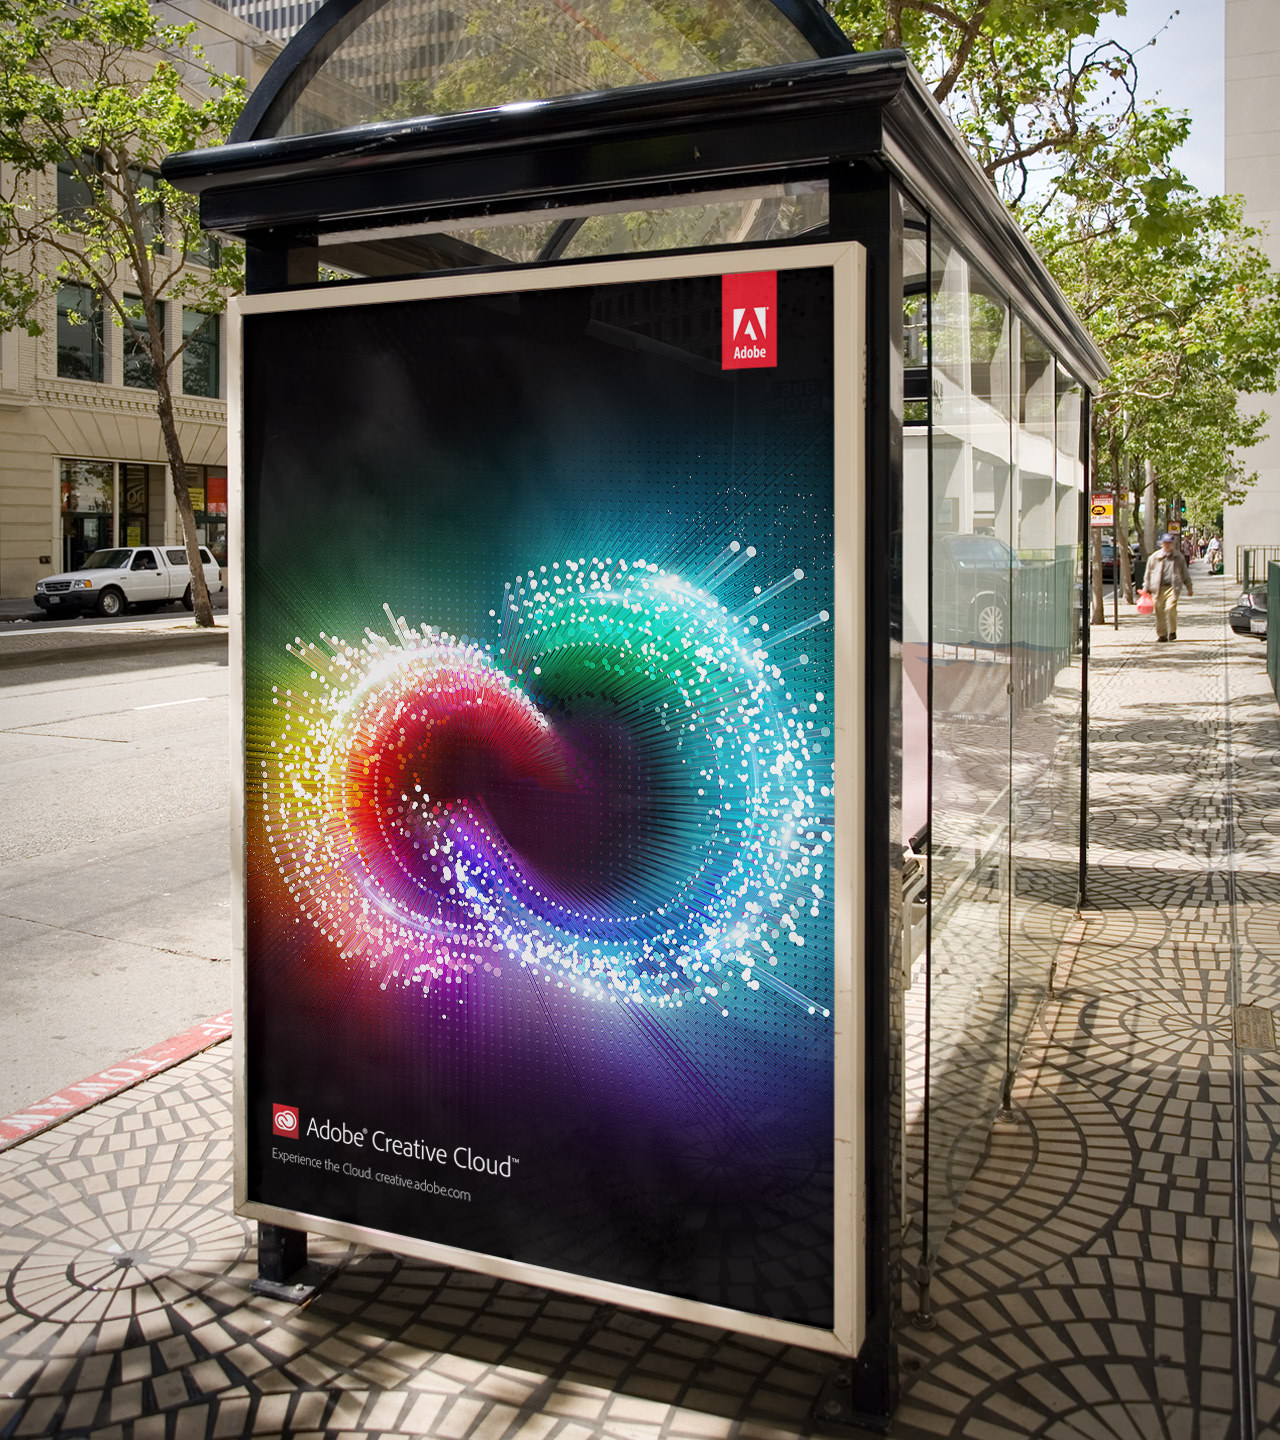 Adobe Creative Cloud Bus Shelter Poster Campaign